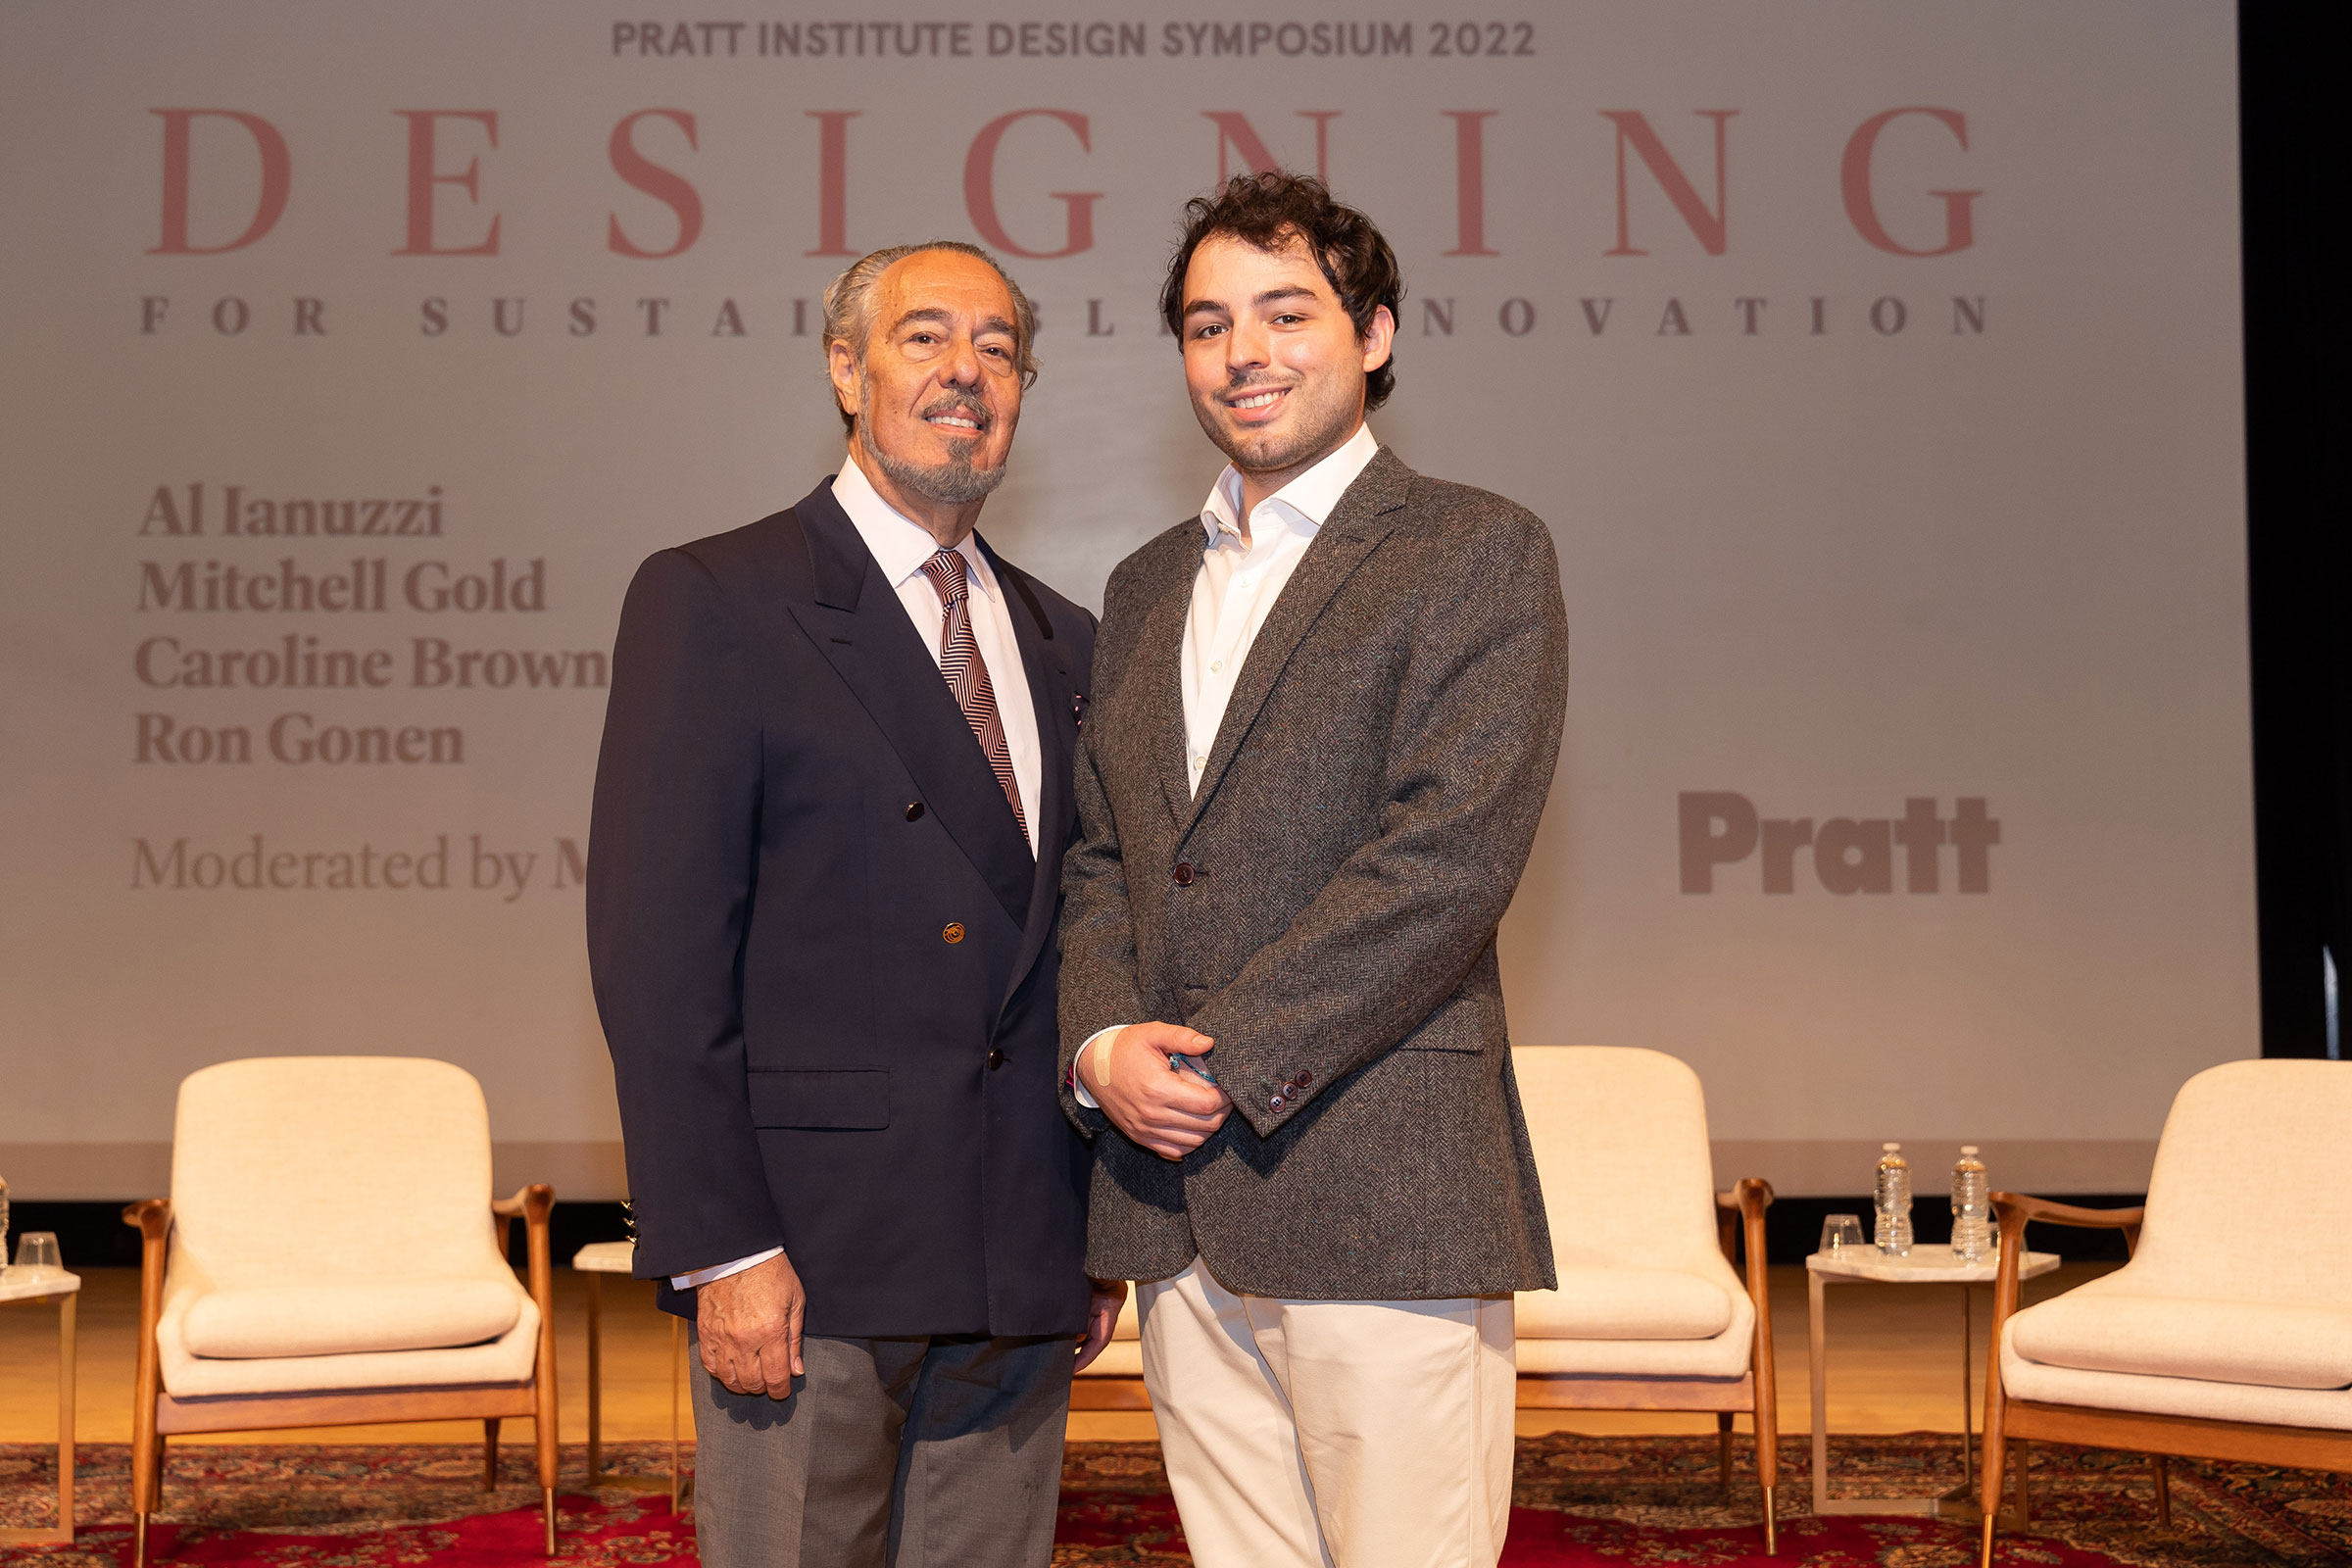 Marc Rosen and Erik Páez Menzel, MS Packaging, Identities and Systems Design ’25, the 2022 recipient of the Marc Rosen Excellence in Sustainable Packaging Scholarship (photo by Samuel Stuart Hollenshead)